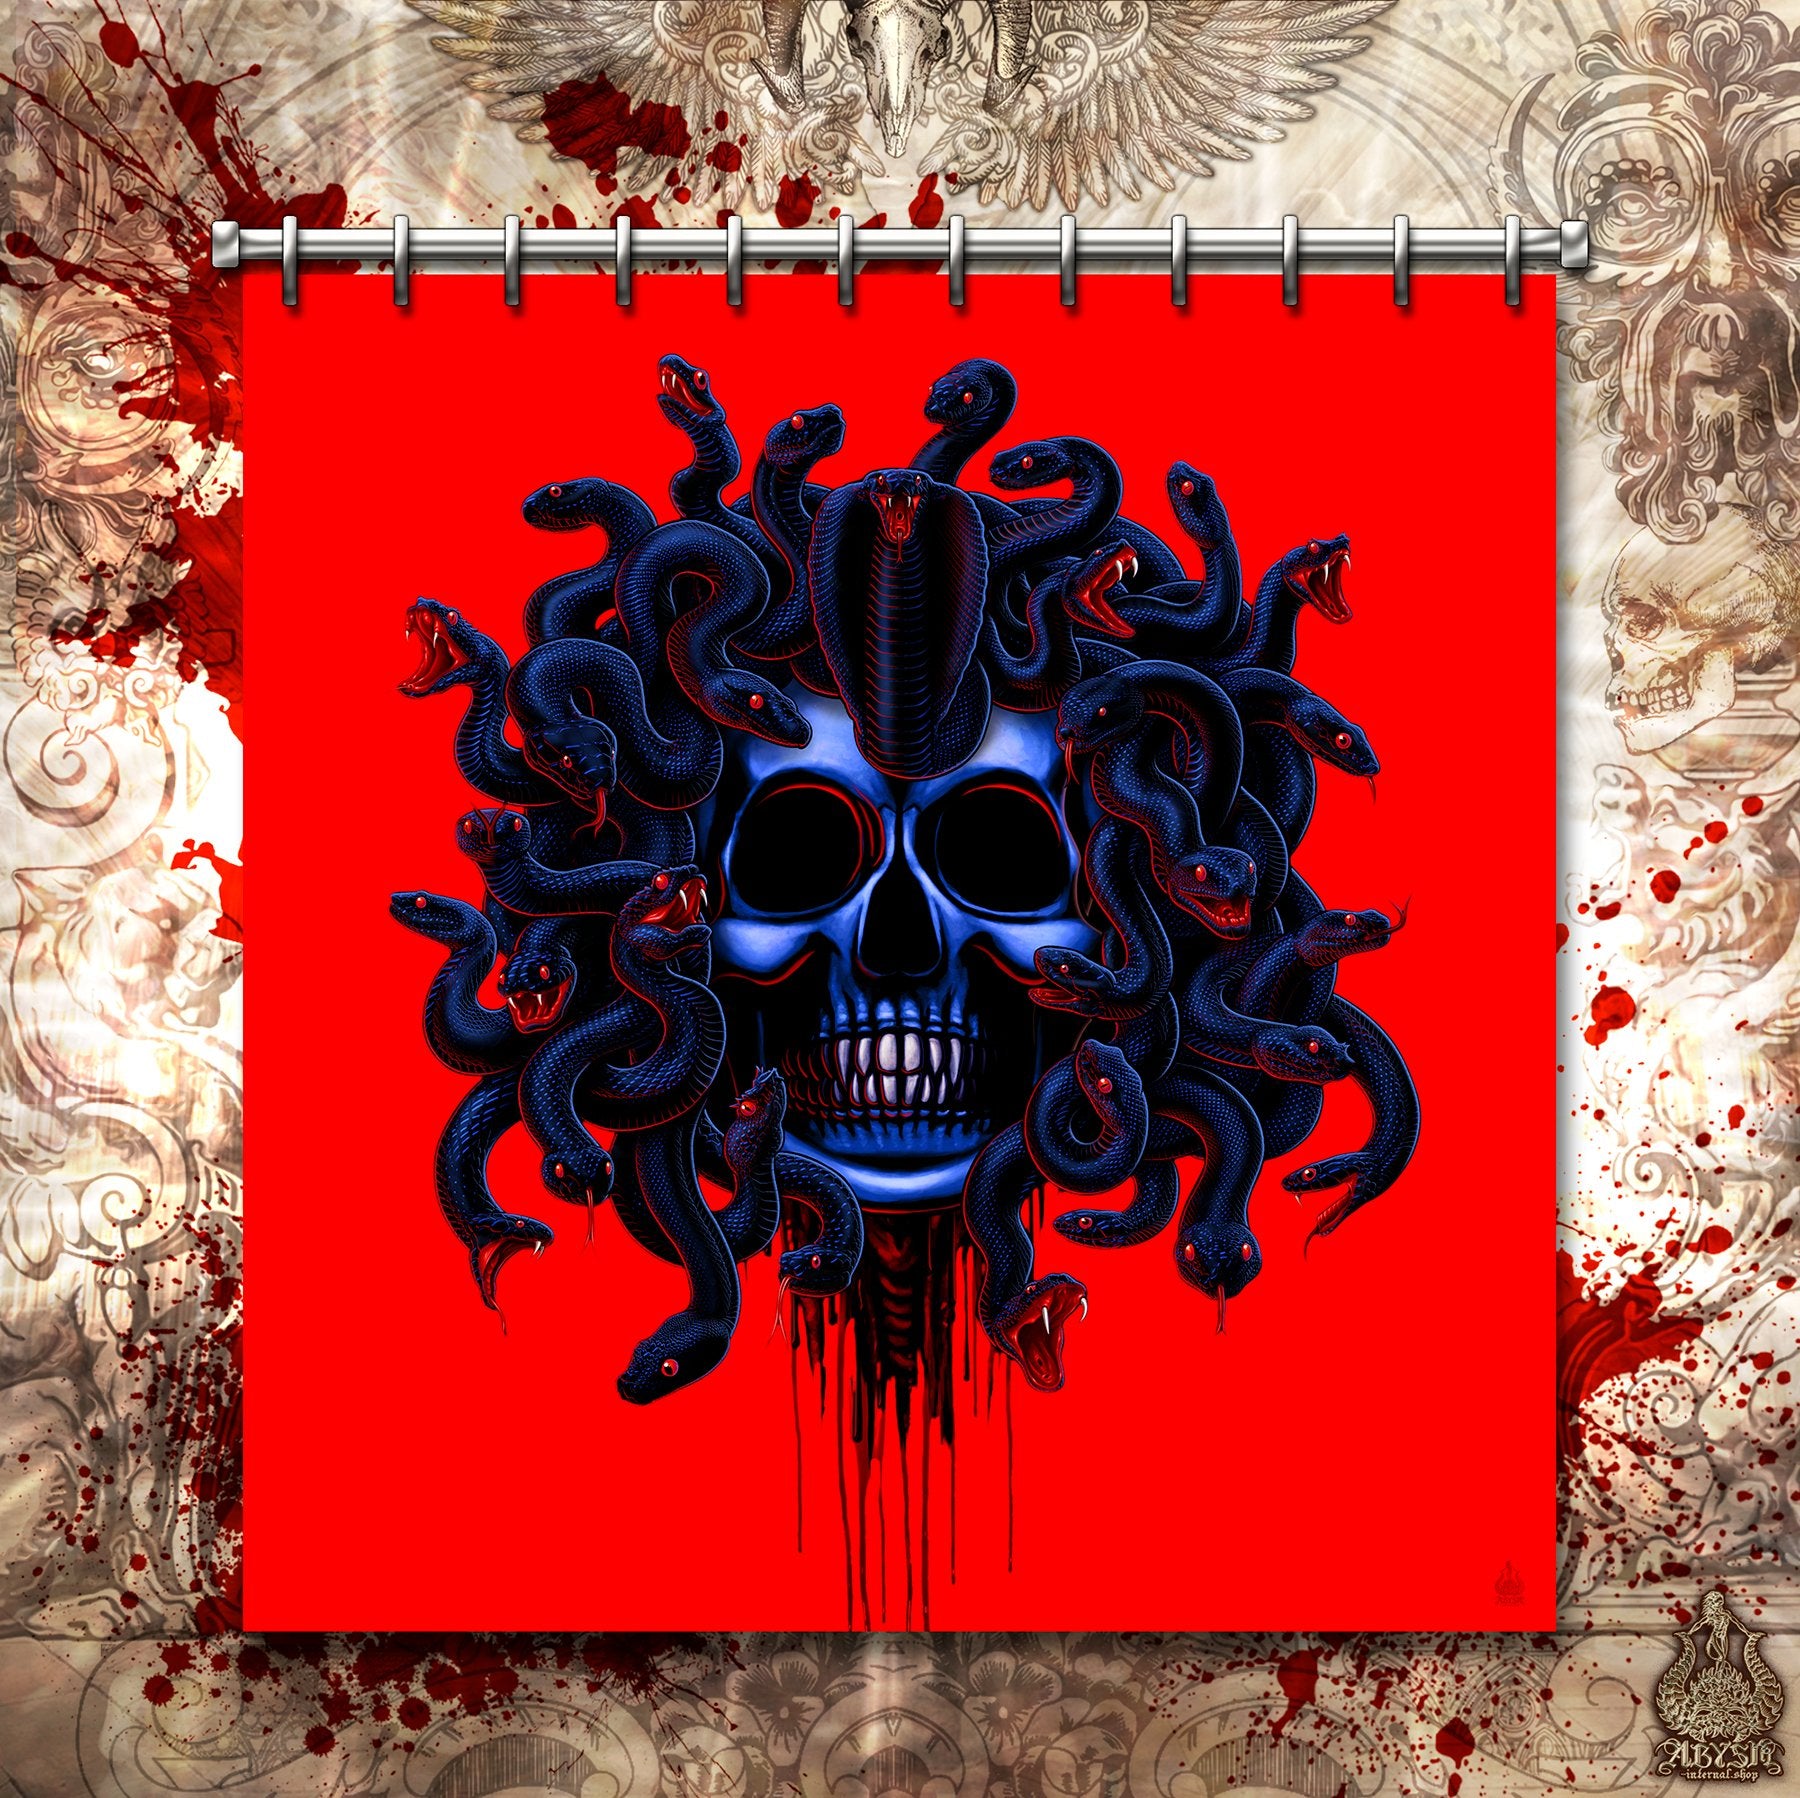 Horror Shower Curtain, 71x74 inches, Black and Red Medusa, Gothic Bathroom Decor, Neon Gothic - Snakes, 3 Faces - Abysm Internal